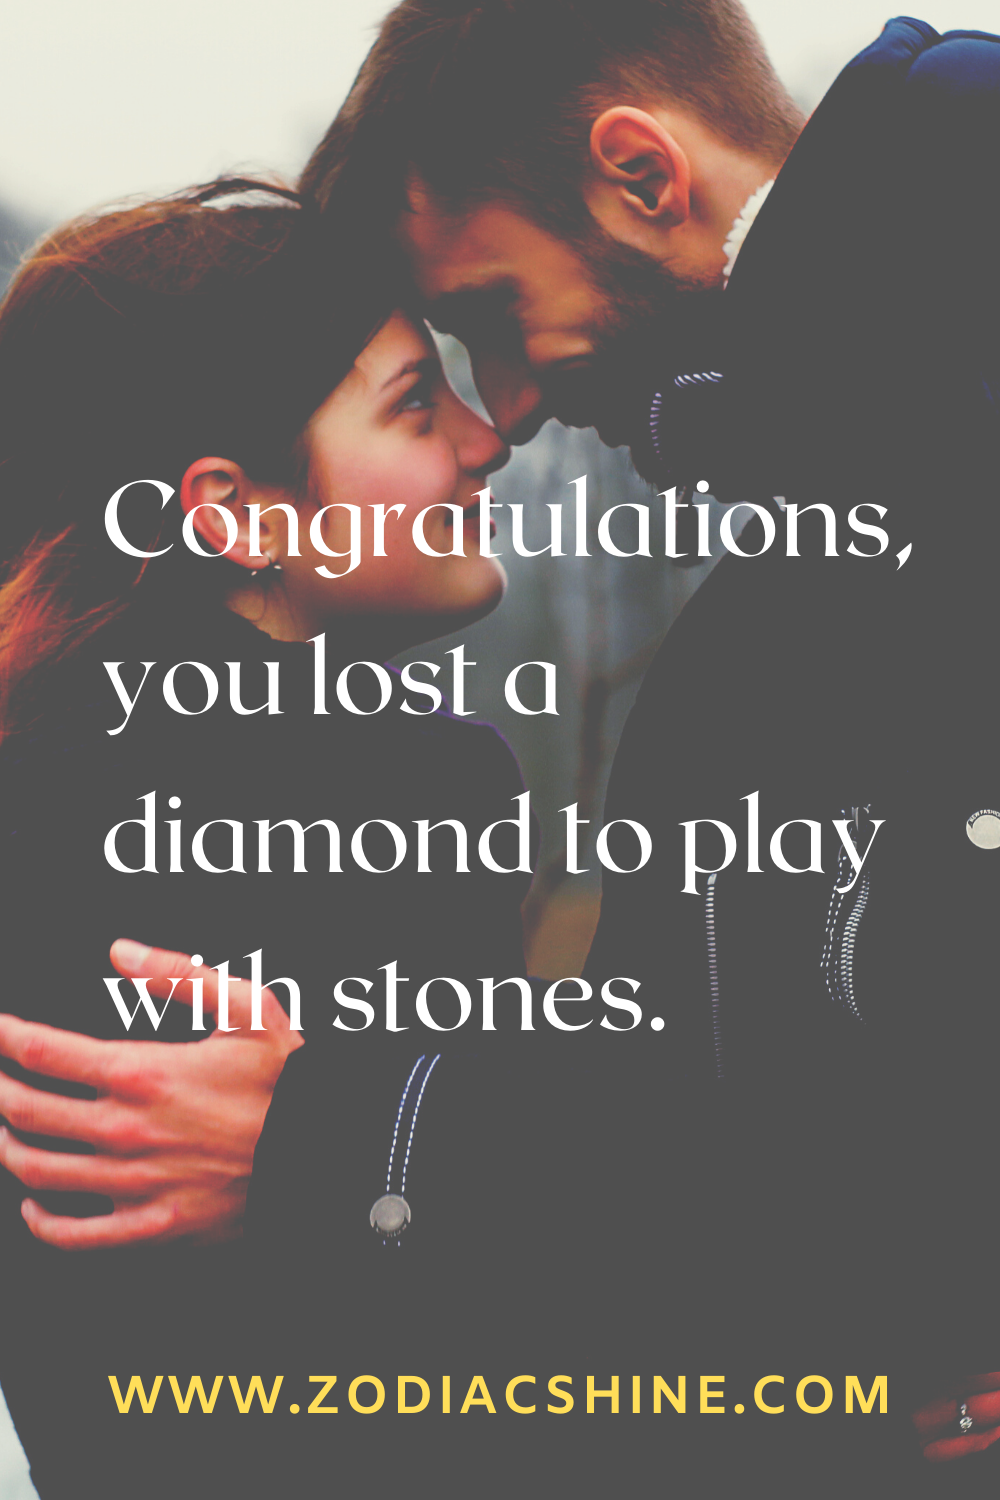 Congratulations, you lost a diamond to play with stones.